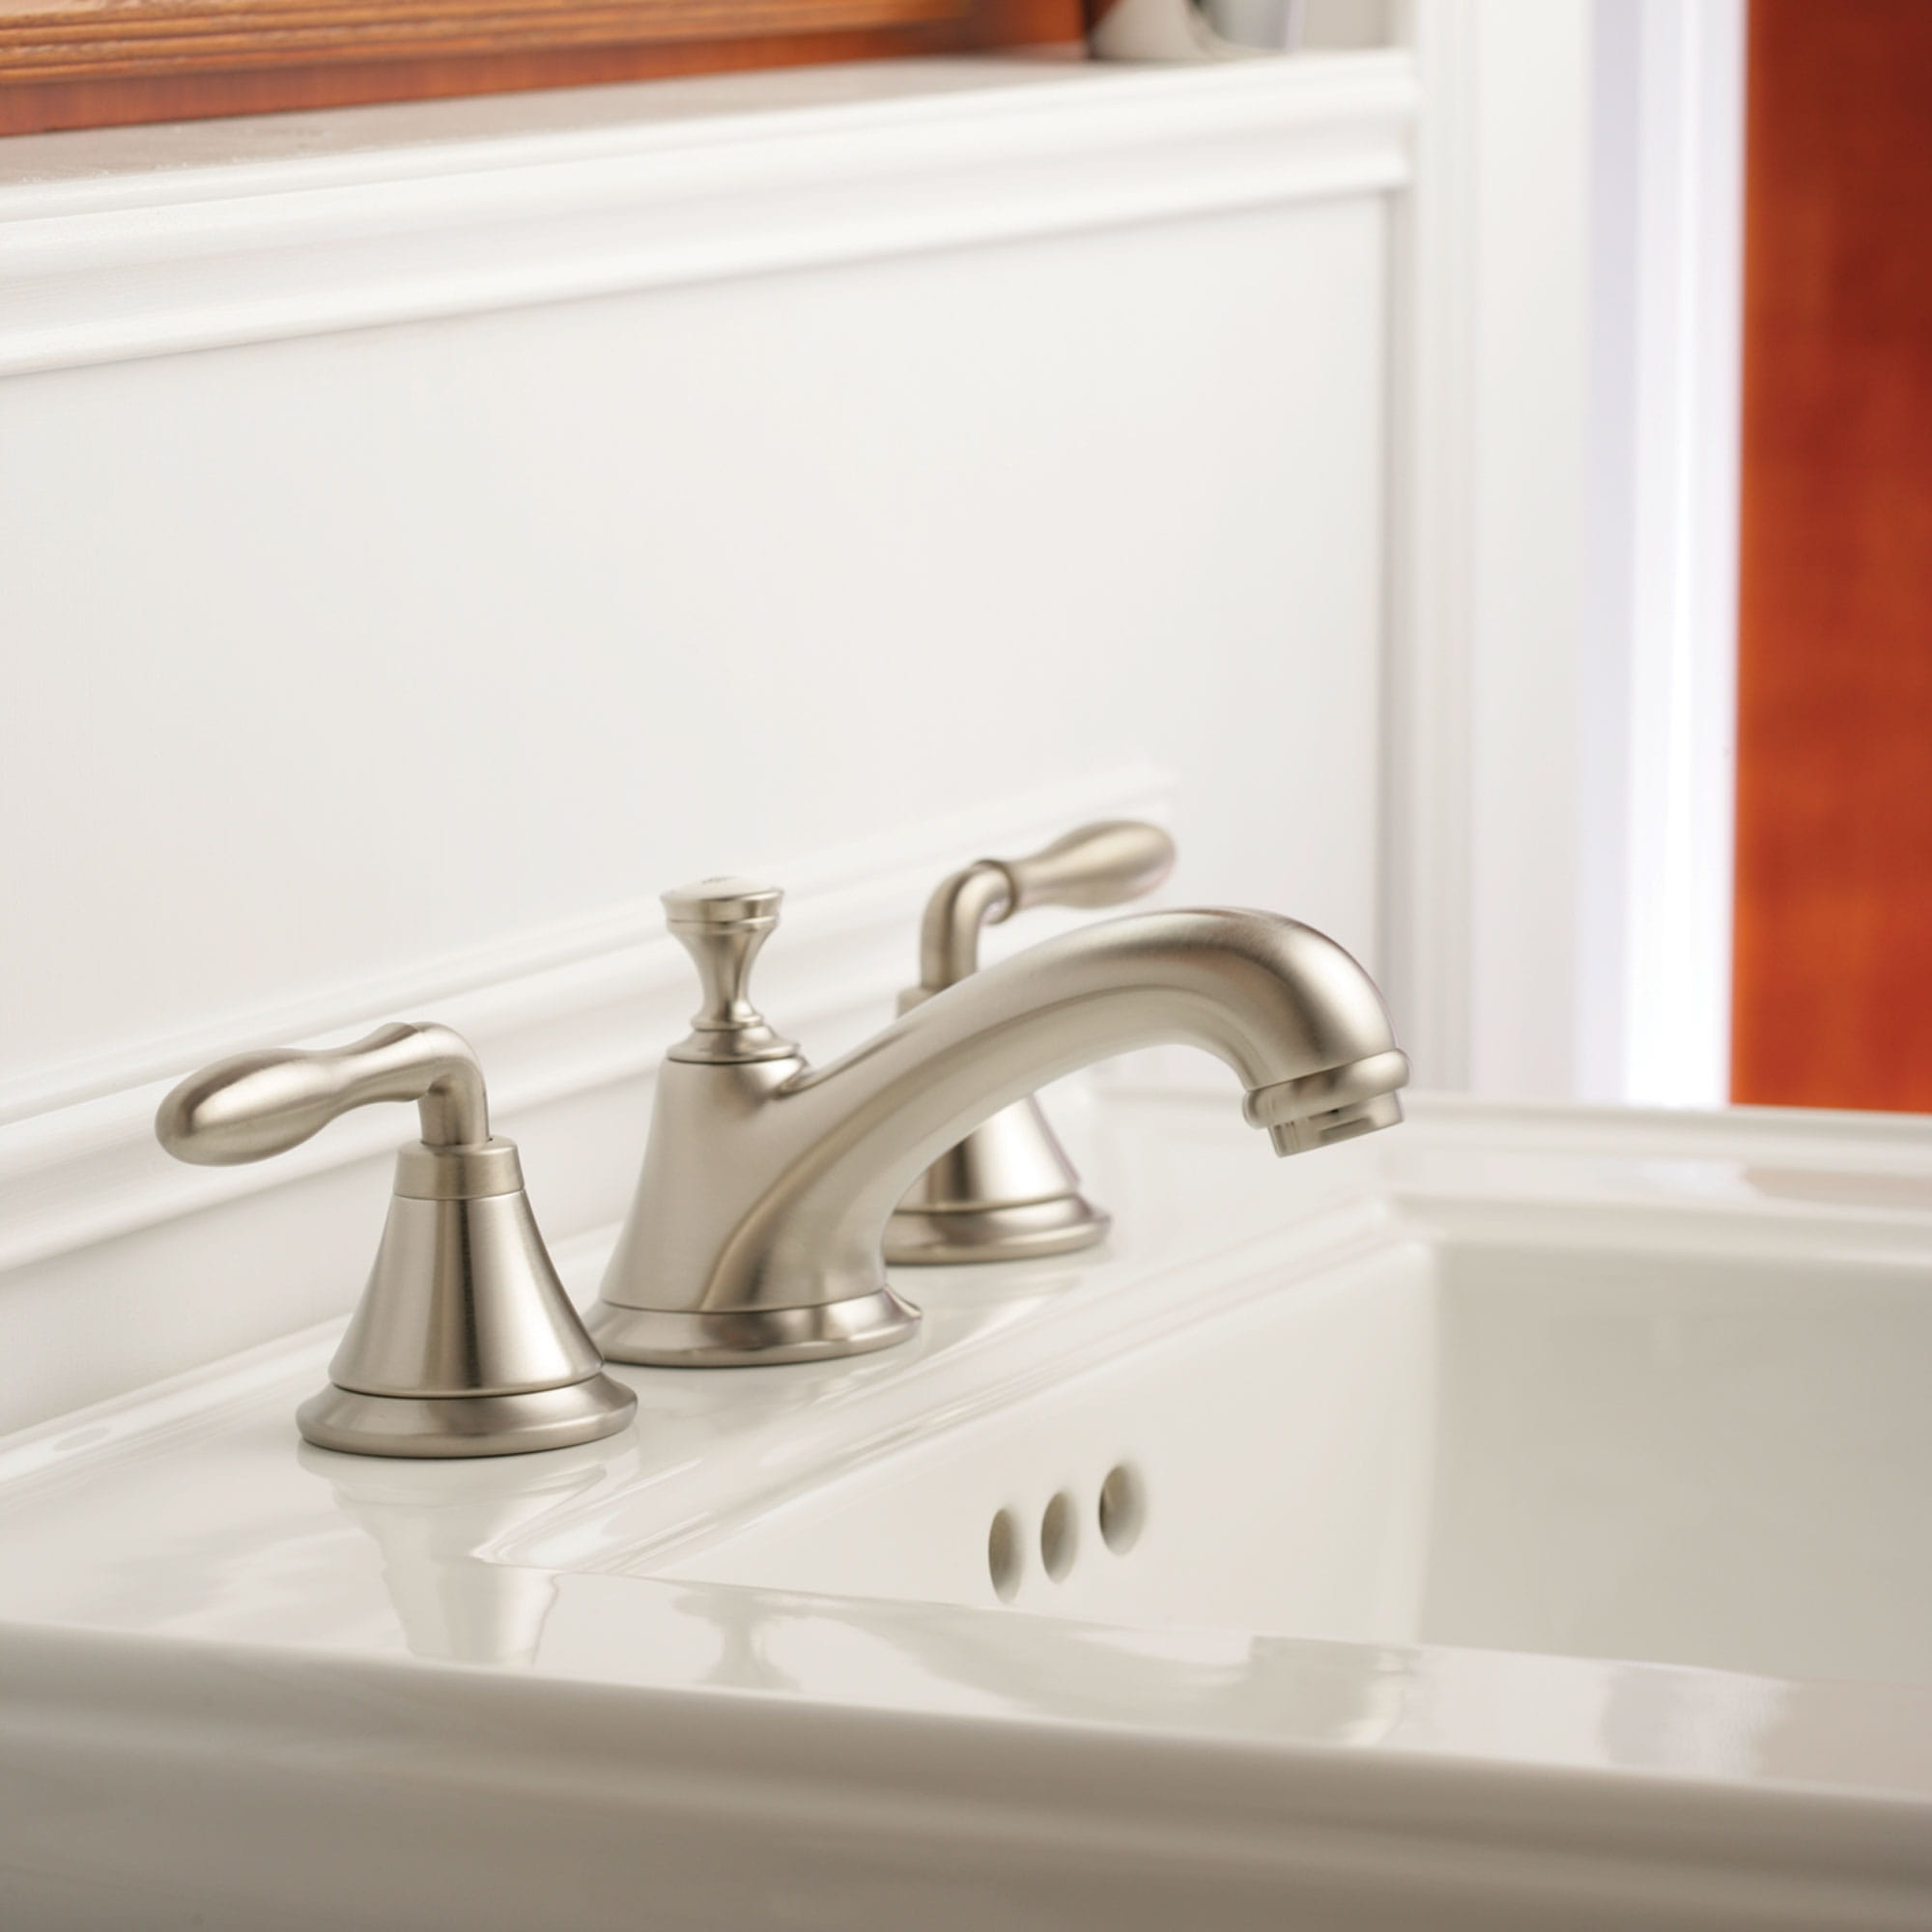 faucet with white background and white sink